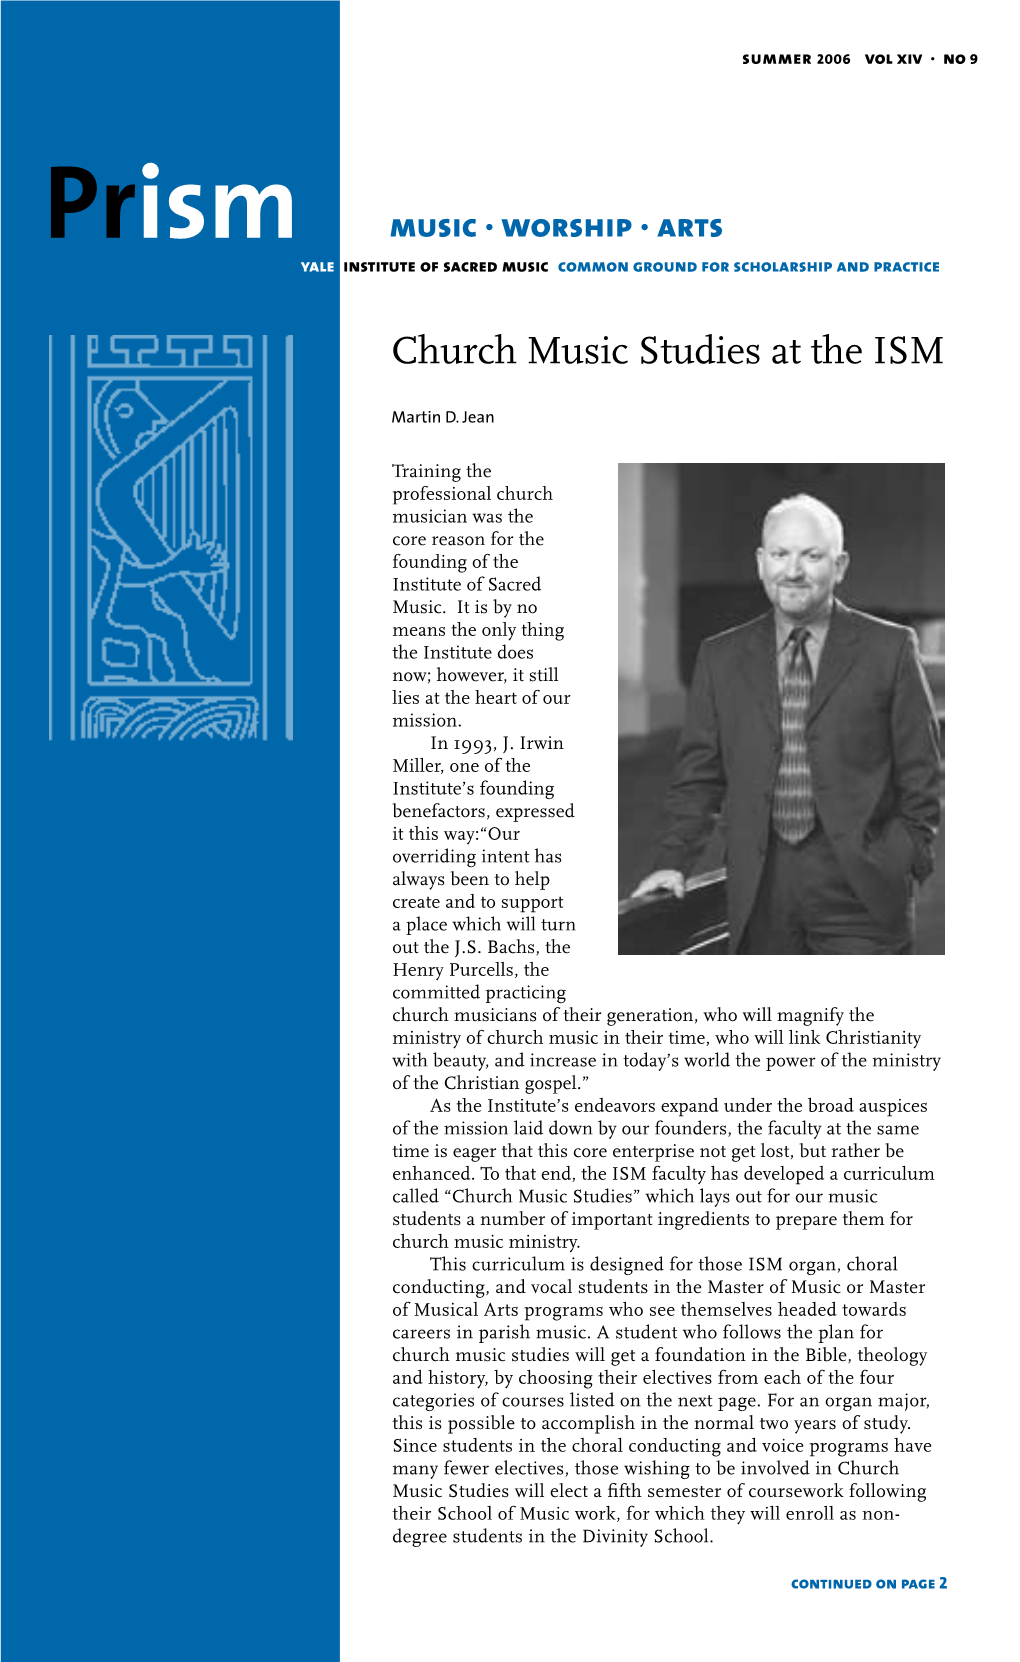 Church Music Studies at the ISM